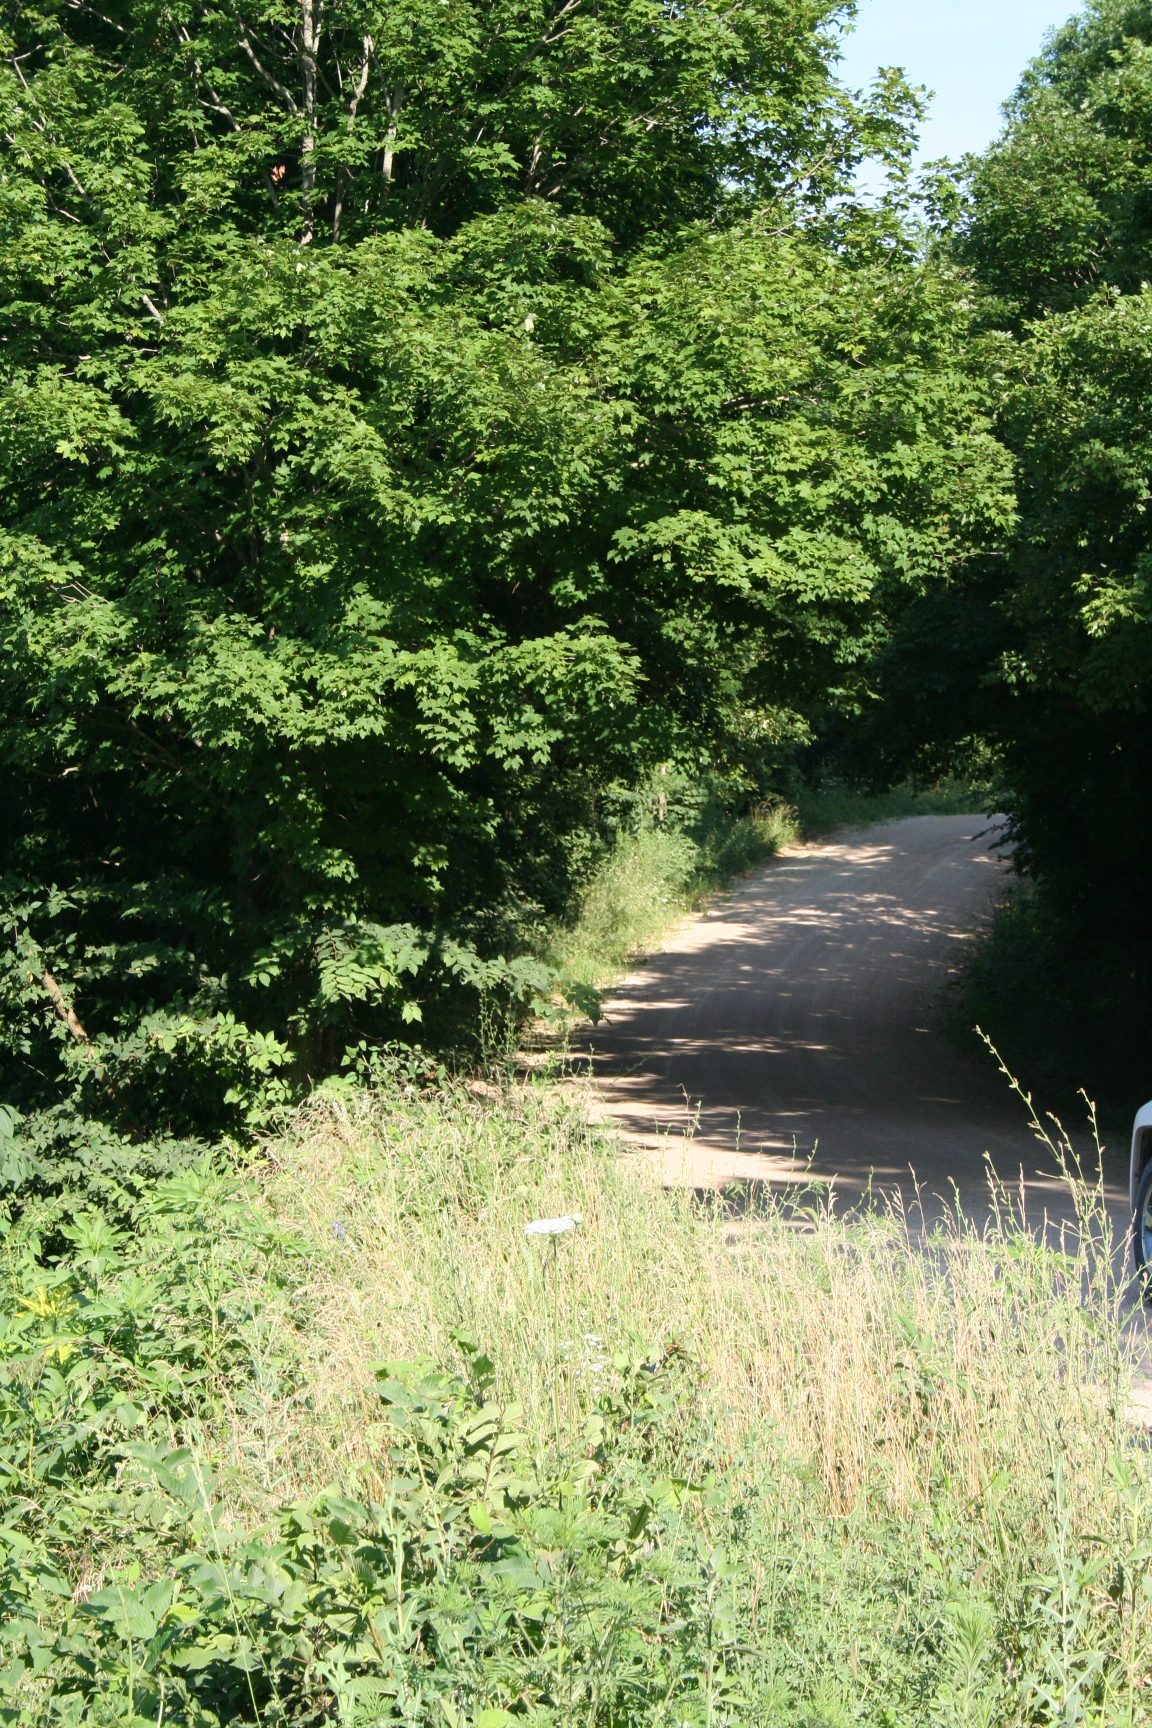 A curve in a recreational trail in the Mark Twain National Forest in Washington County, Missouri